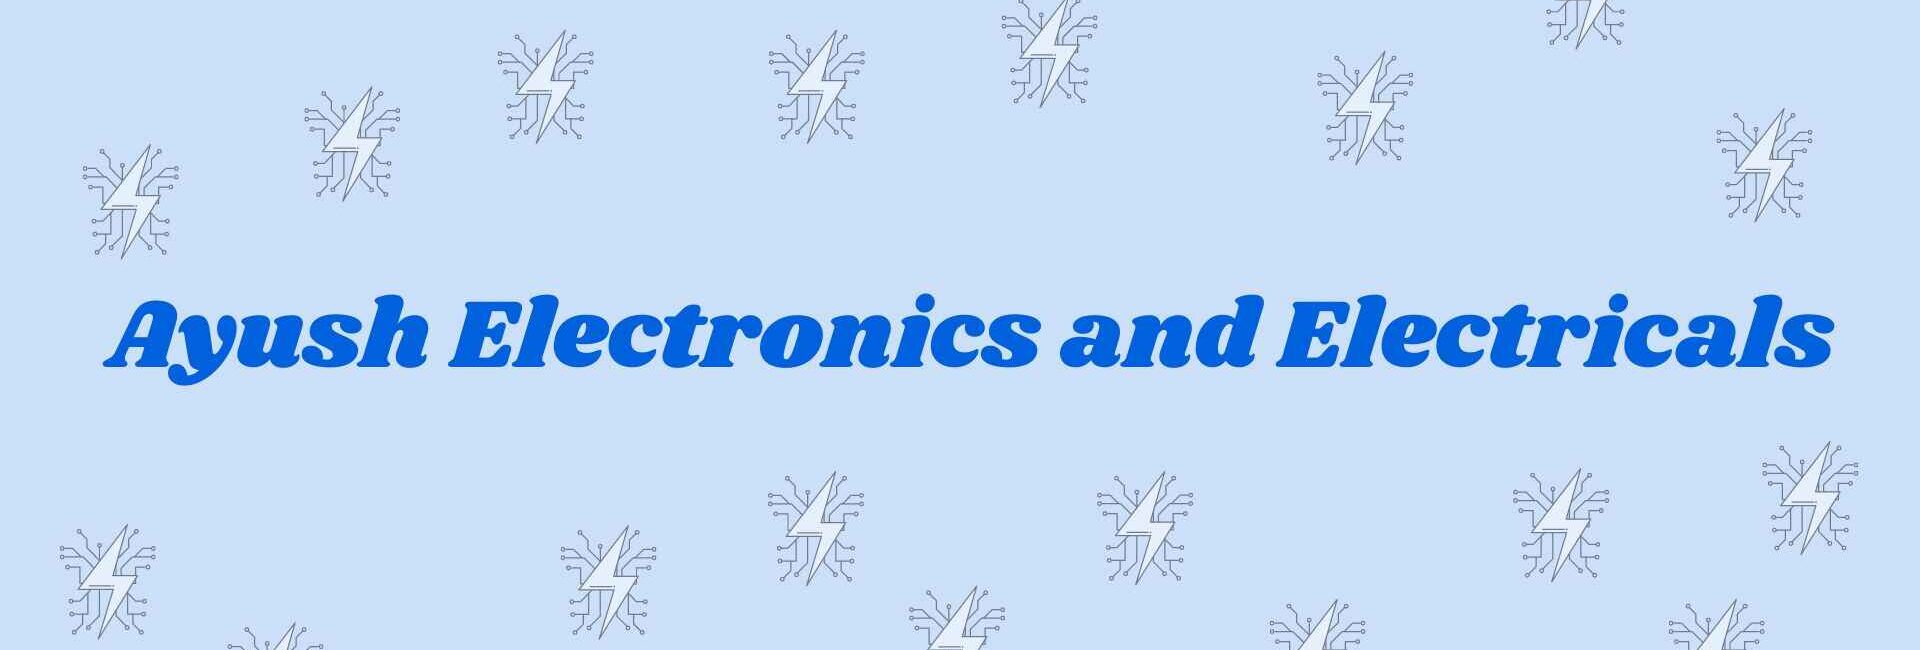 Ayush Electronics and Electricals - Electronics Goods Dealer in Noida